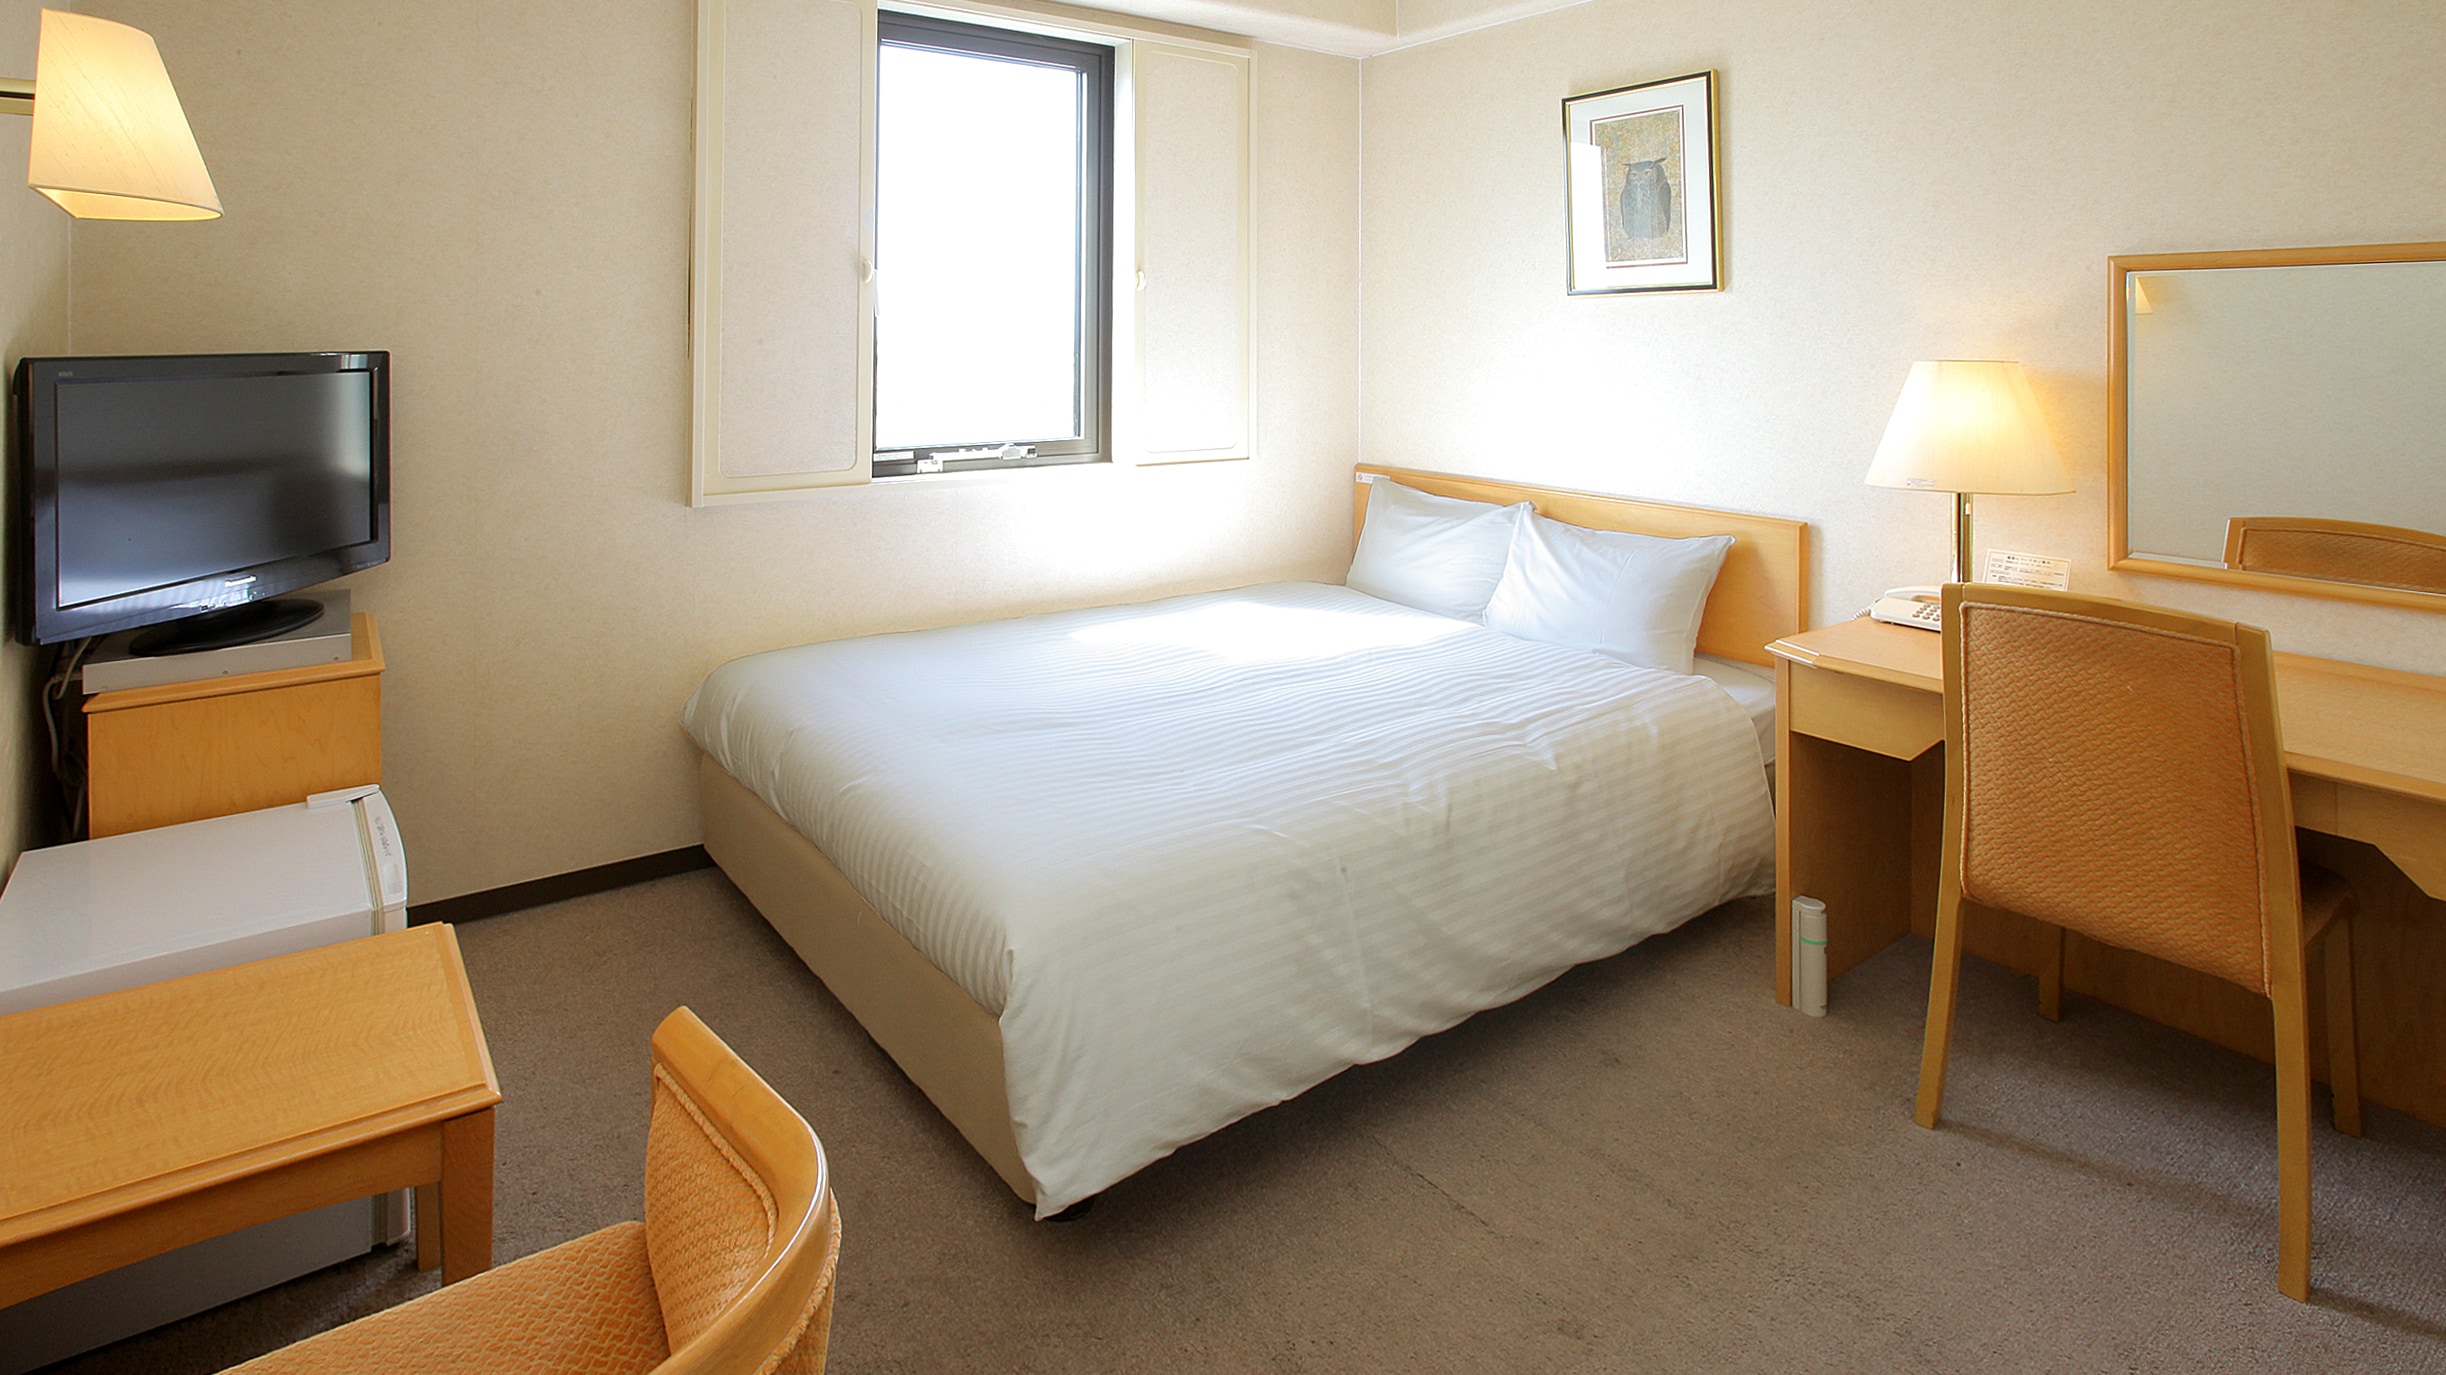 Double room ◇ Area 17㎡ ◇ Popular with couples! ◇